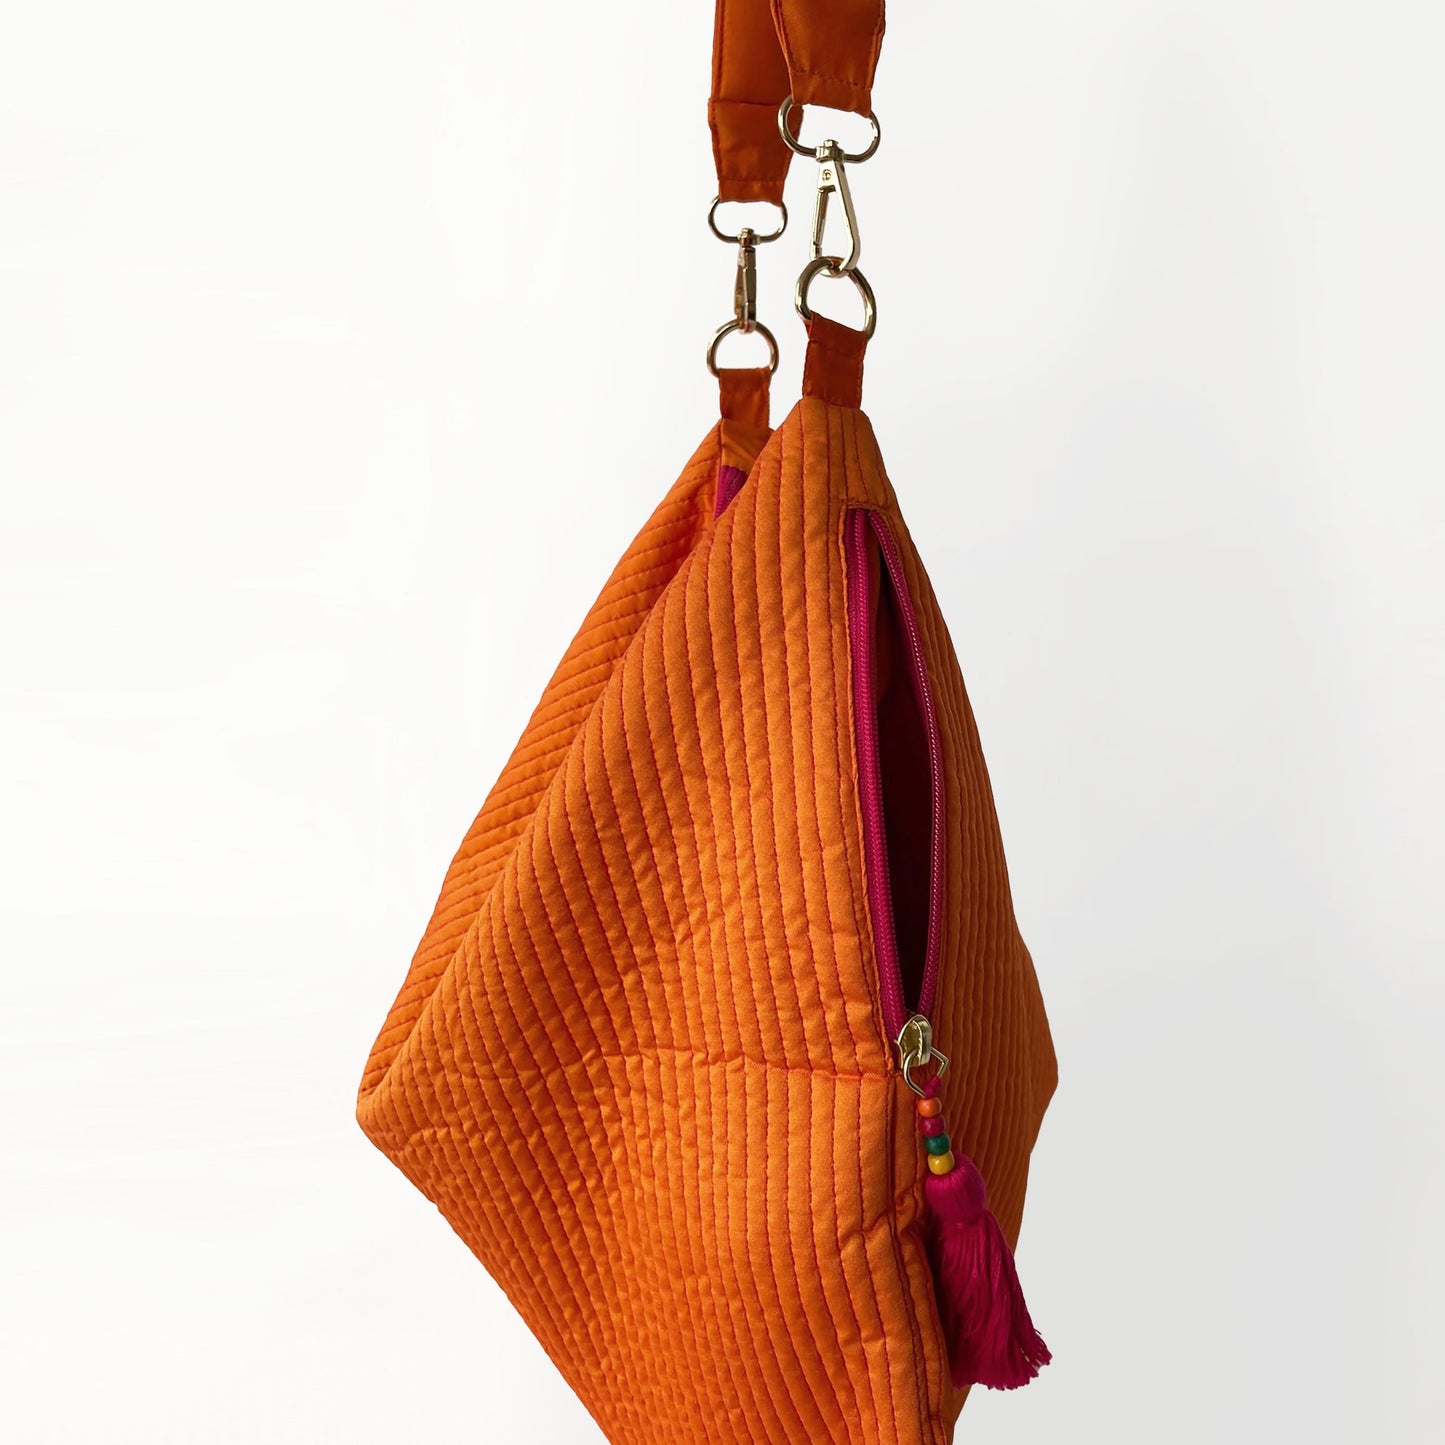 Faux Silk quilted HOBO Bag, Tangerine, hand embroidered handle, Gift for her